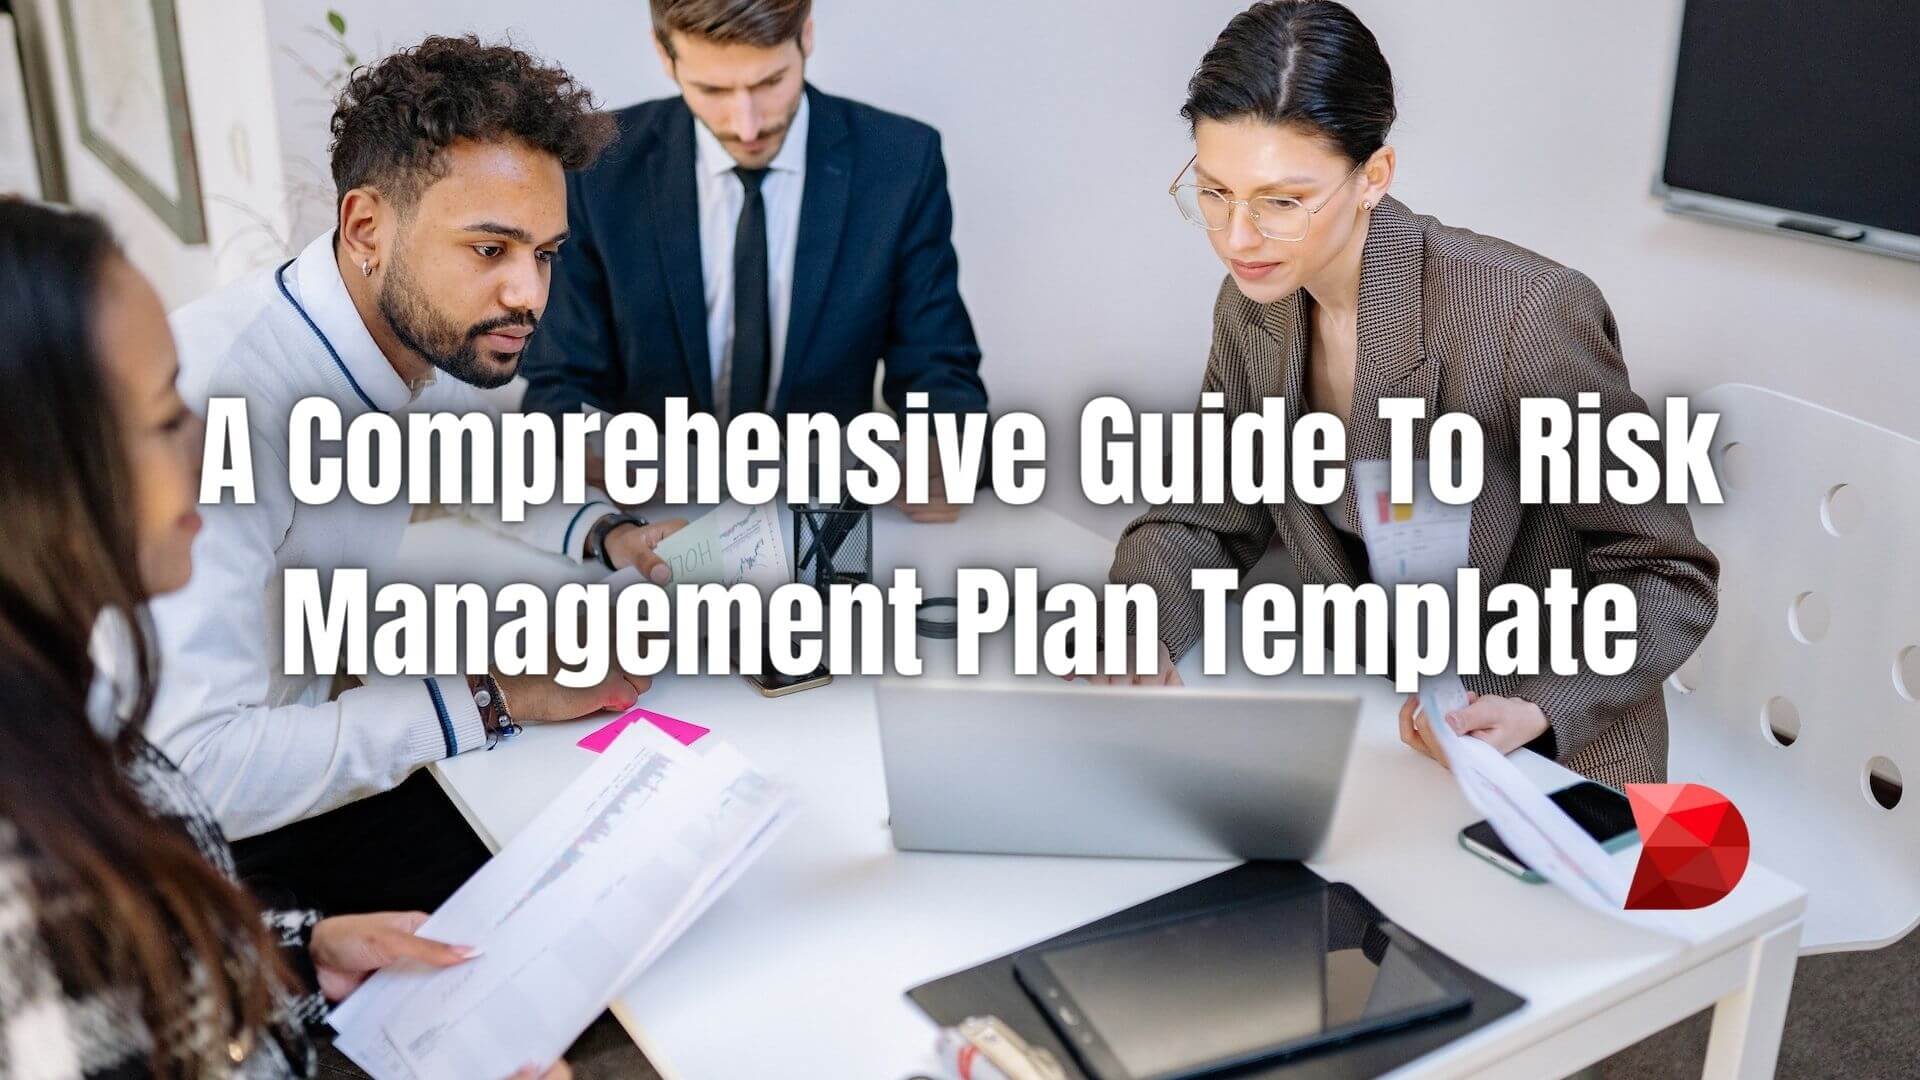 A risk management plan template provides a structured framework for identifying, analyzing, and managing risks in a project. Learn more!